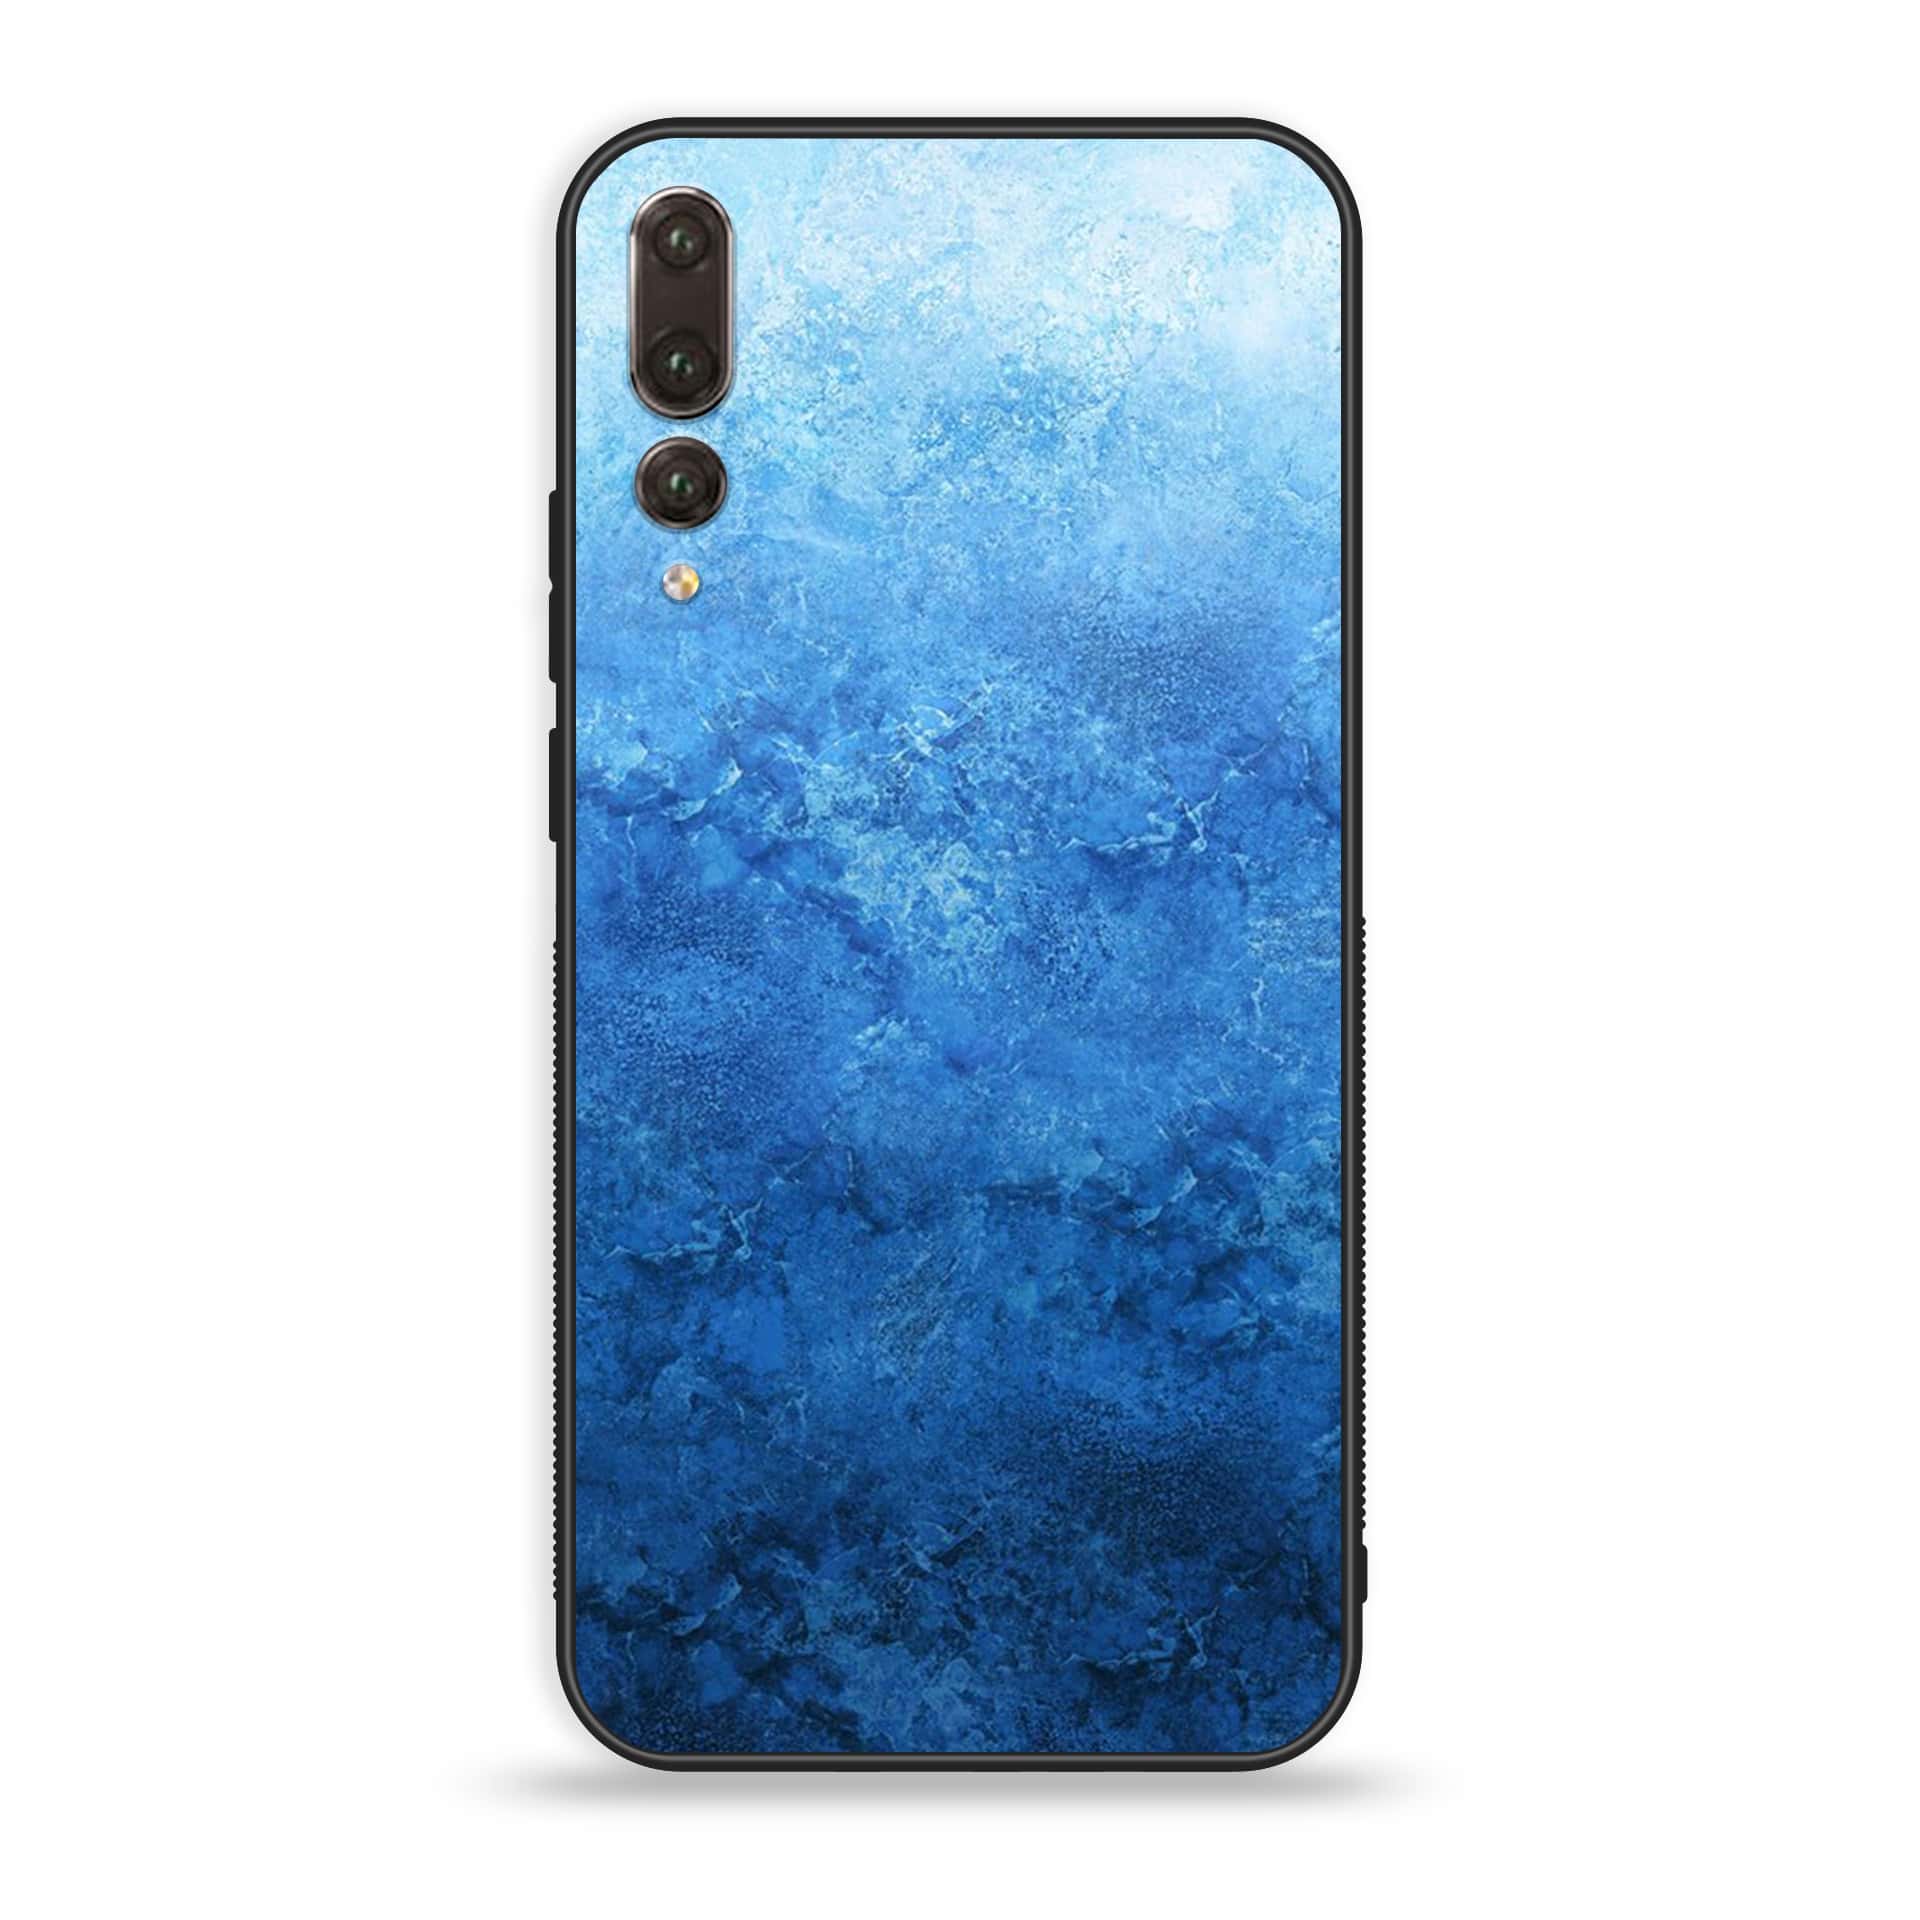 Huawei P20 Pro - Blue Marble Series - Premium Printed Glass soft Bumper shock Proof Case